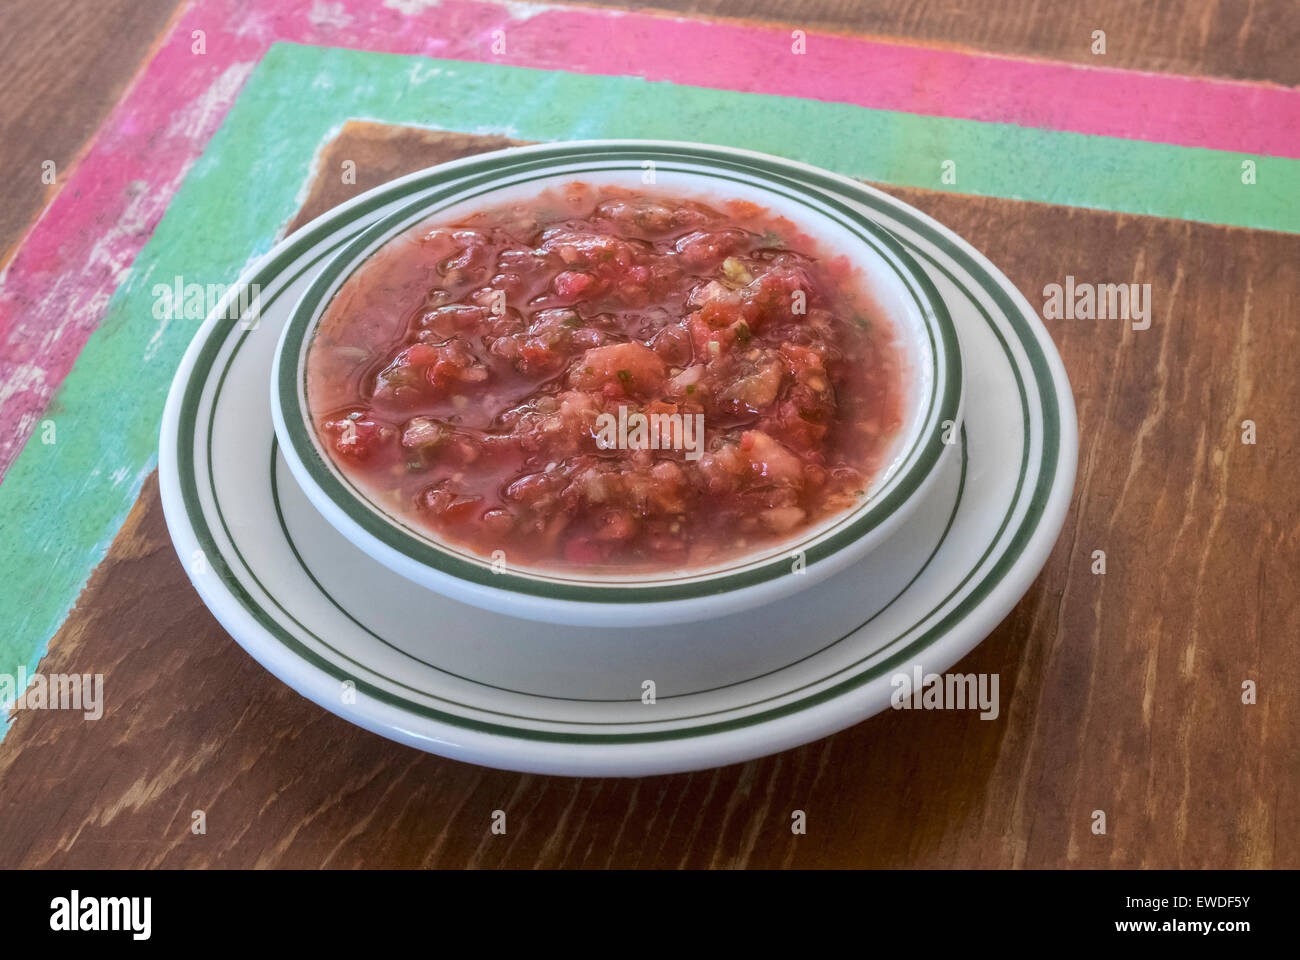 Salsa fresca, a spicy Mexican side dish Stock Photo